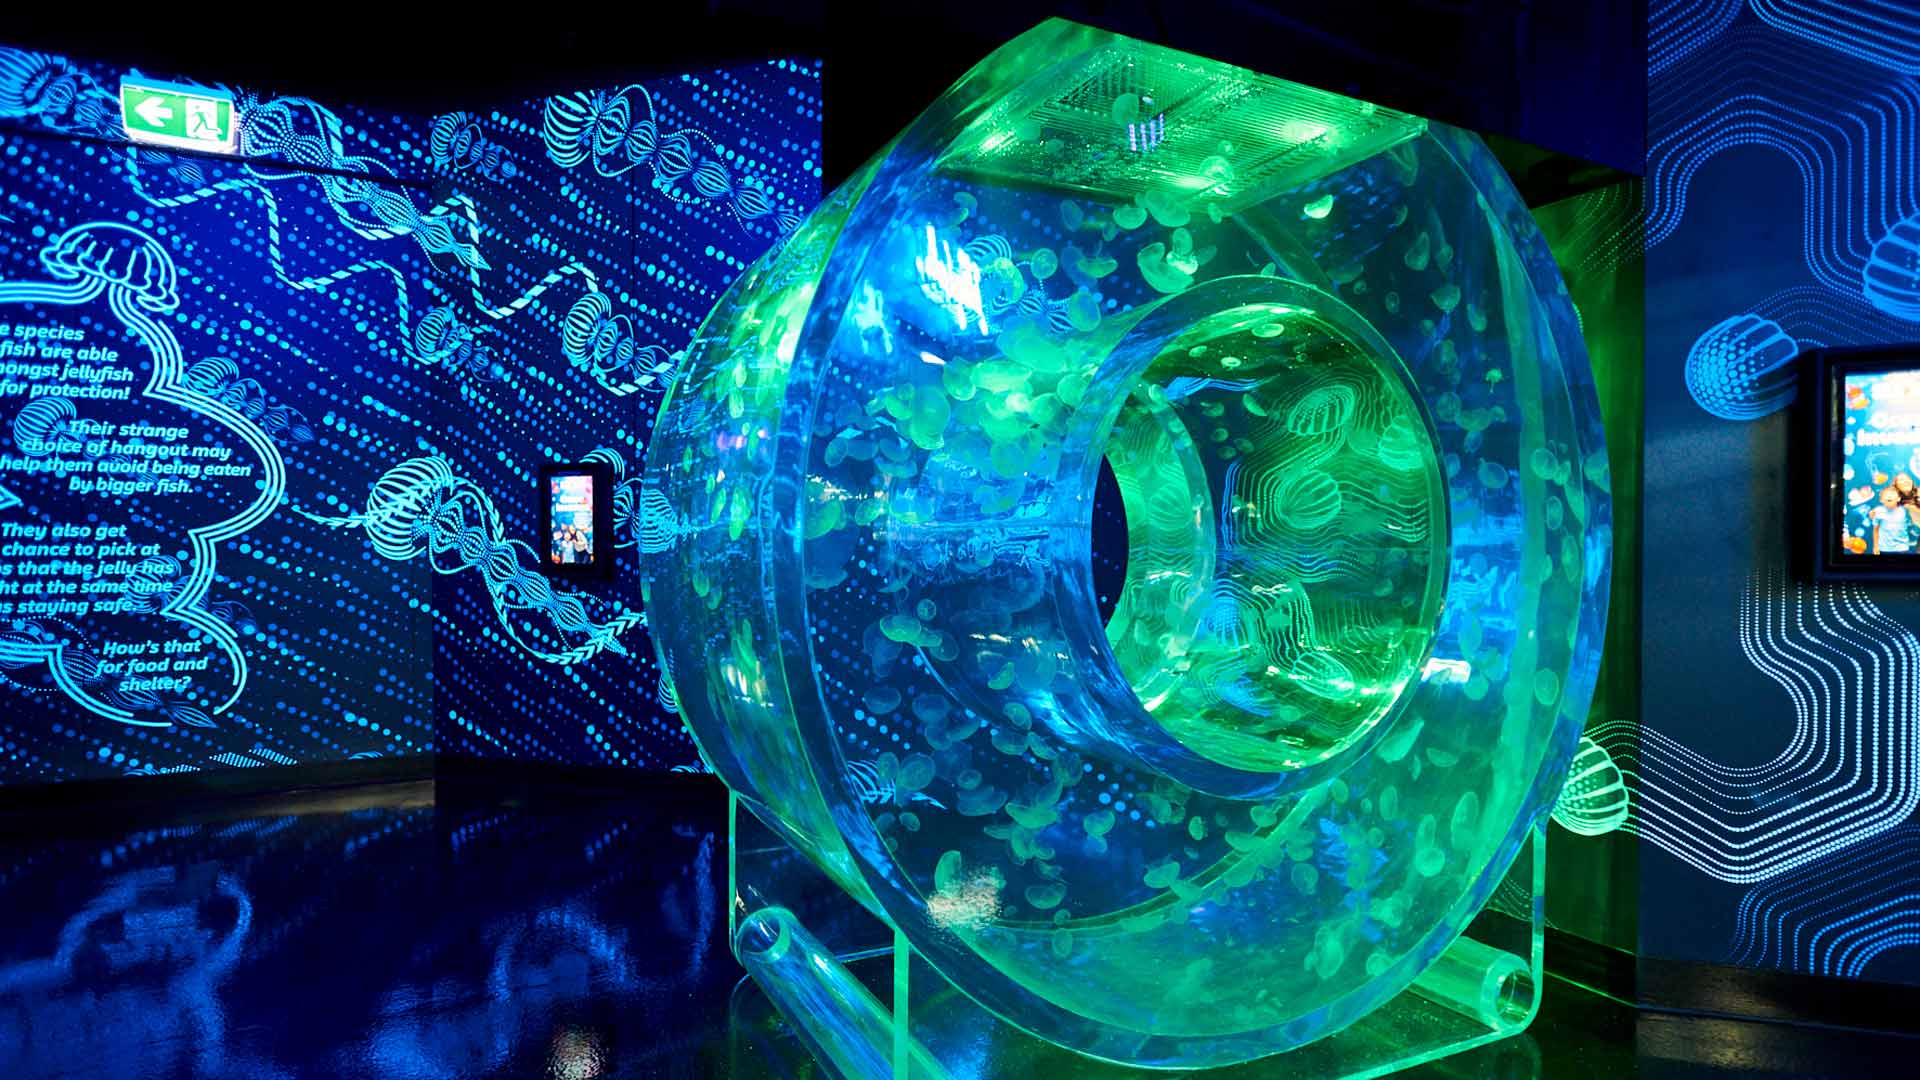 Melbourne Aquarium Is Now Home to an Interactive and Luminous Jellyfish Exhibition